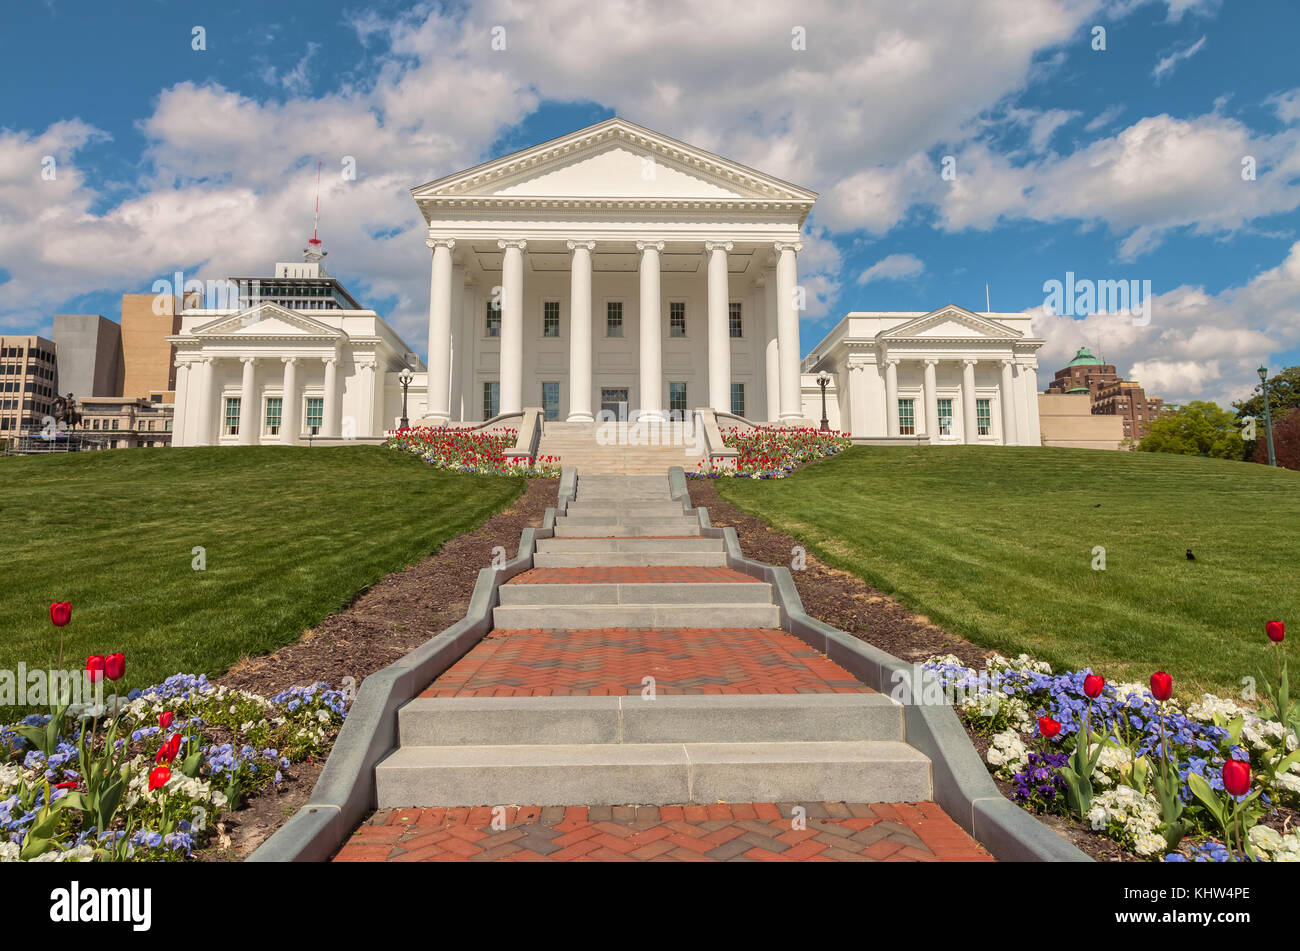 Architectural structures of the Virginia State Capitol Building, Richmond, Virginia, United States. Stock Photo